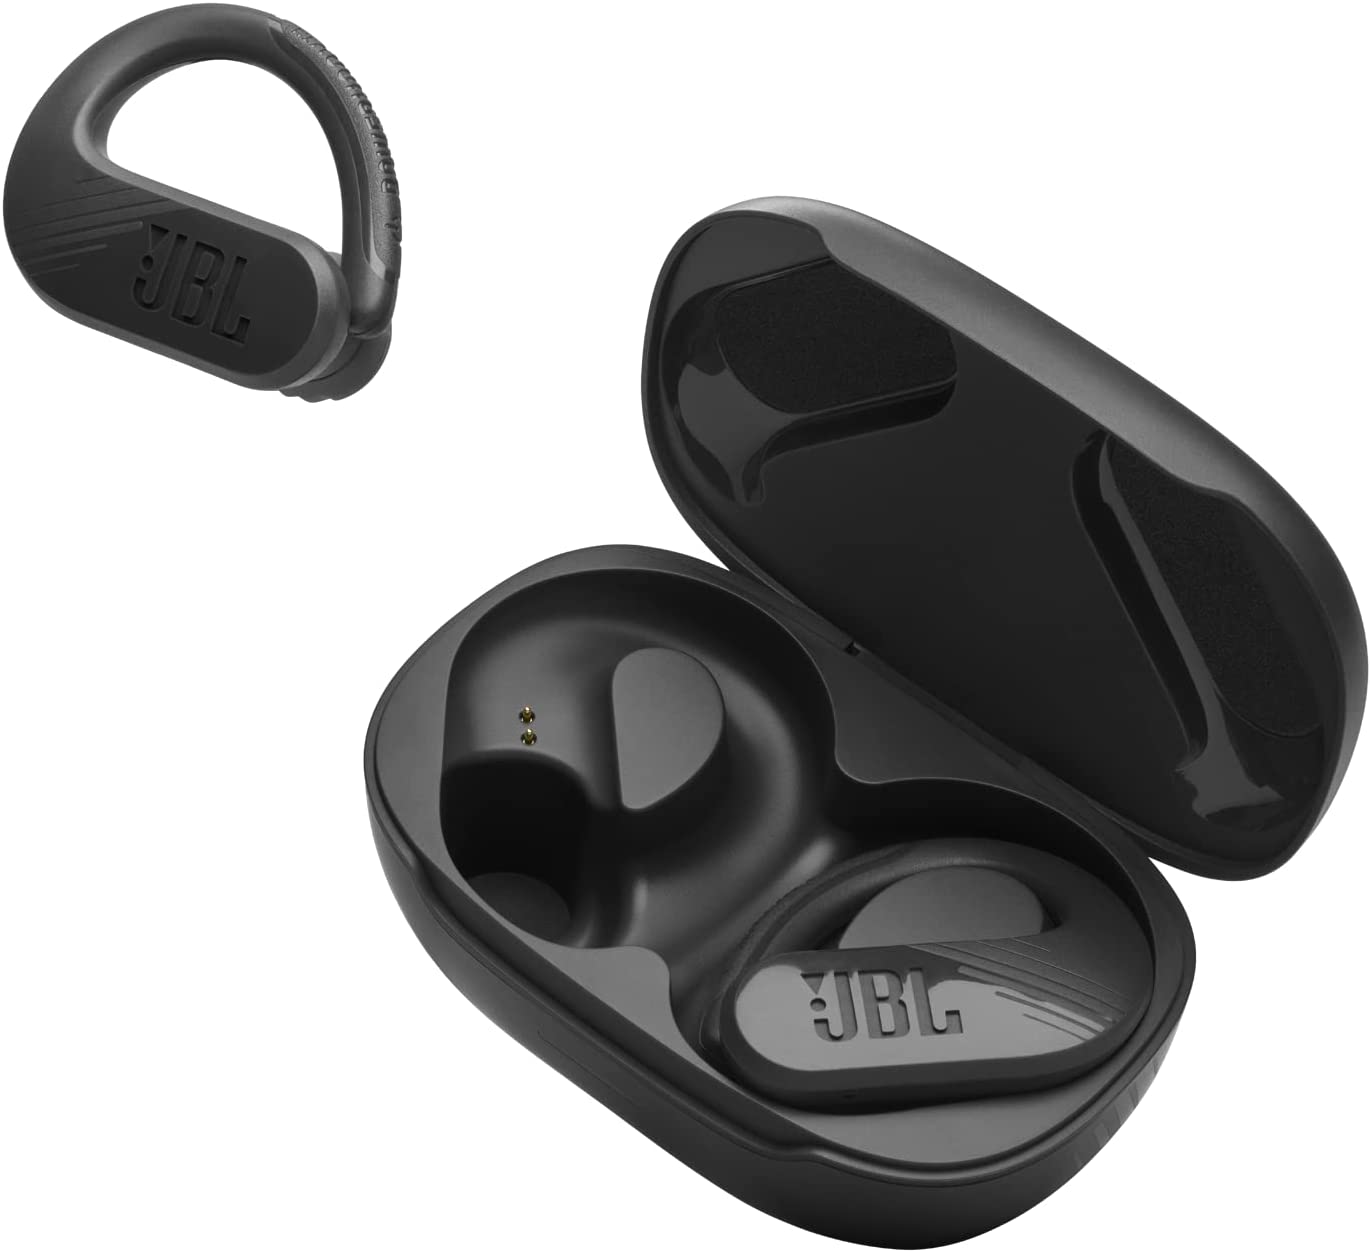 Product image of JBL Endurance Peak 3 earbuds and case on a white background